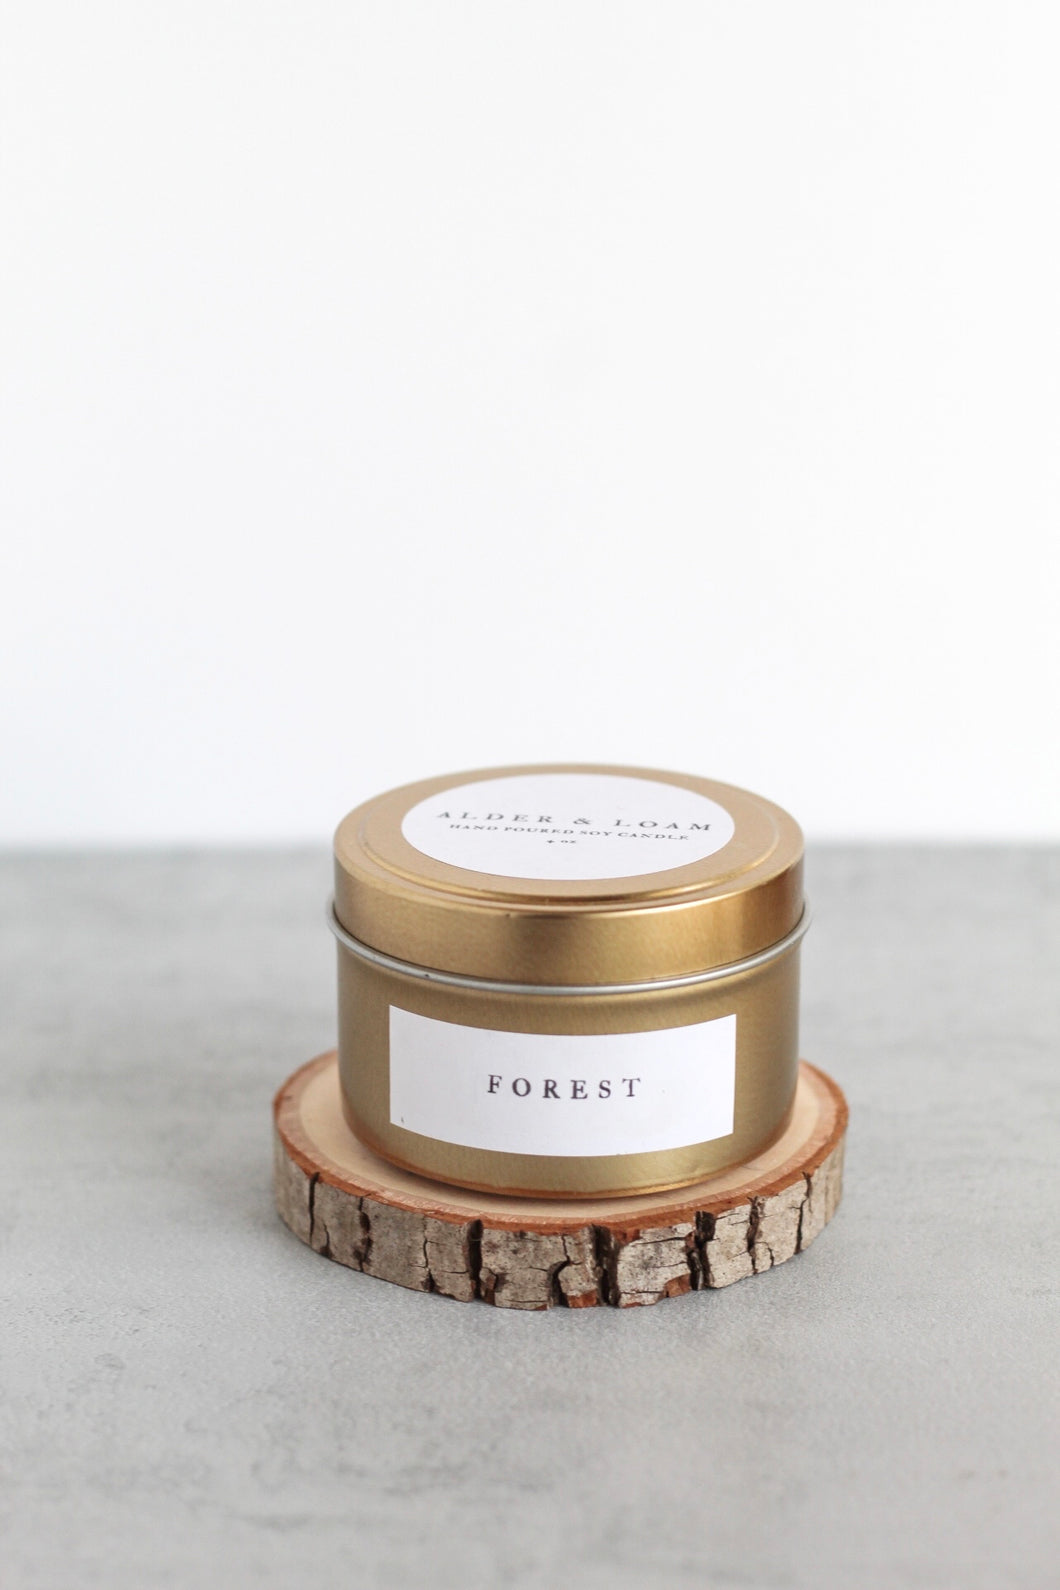 Forest Soy Candle, Hand Poured, Natural, Eco Friendly, Earthy Scent, 4 oz Tin